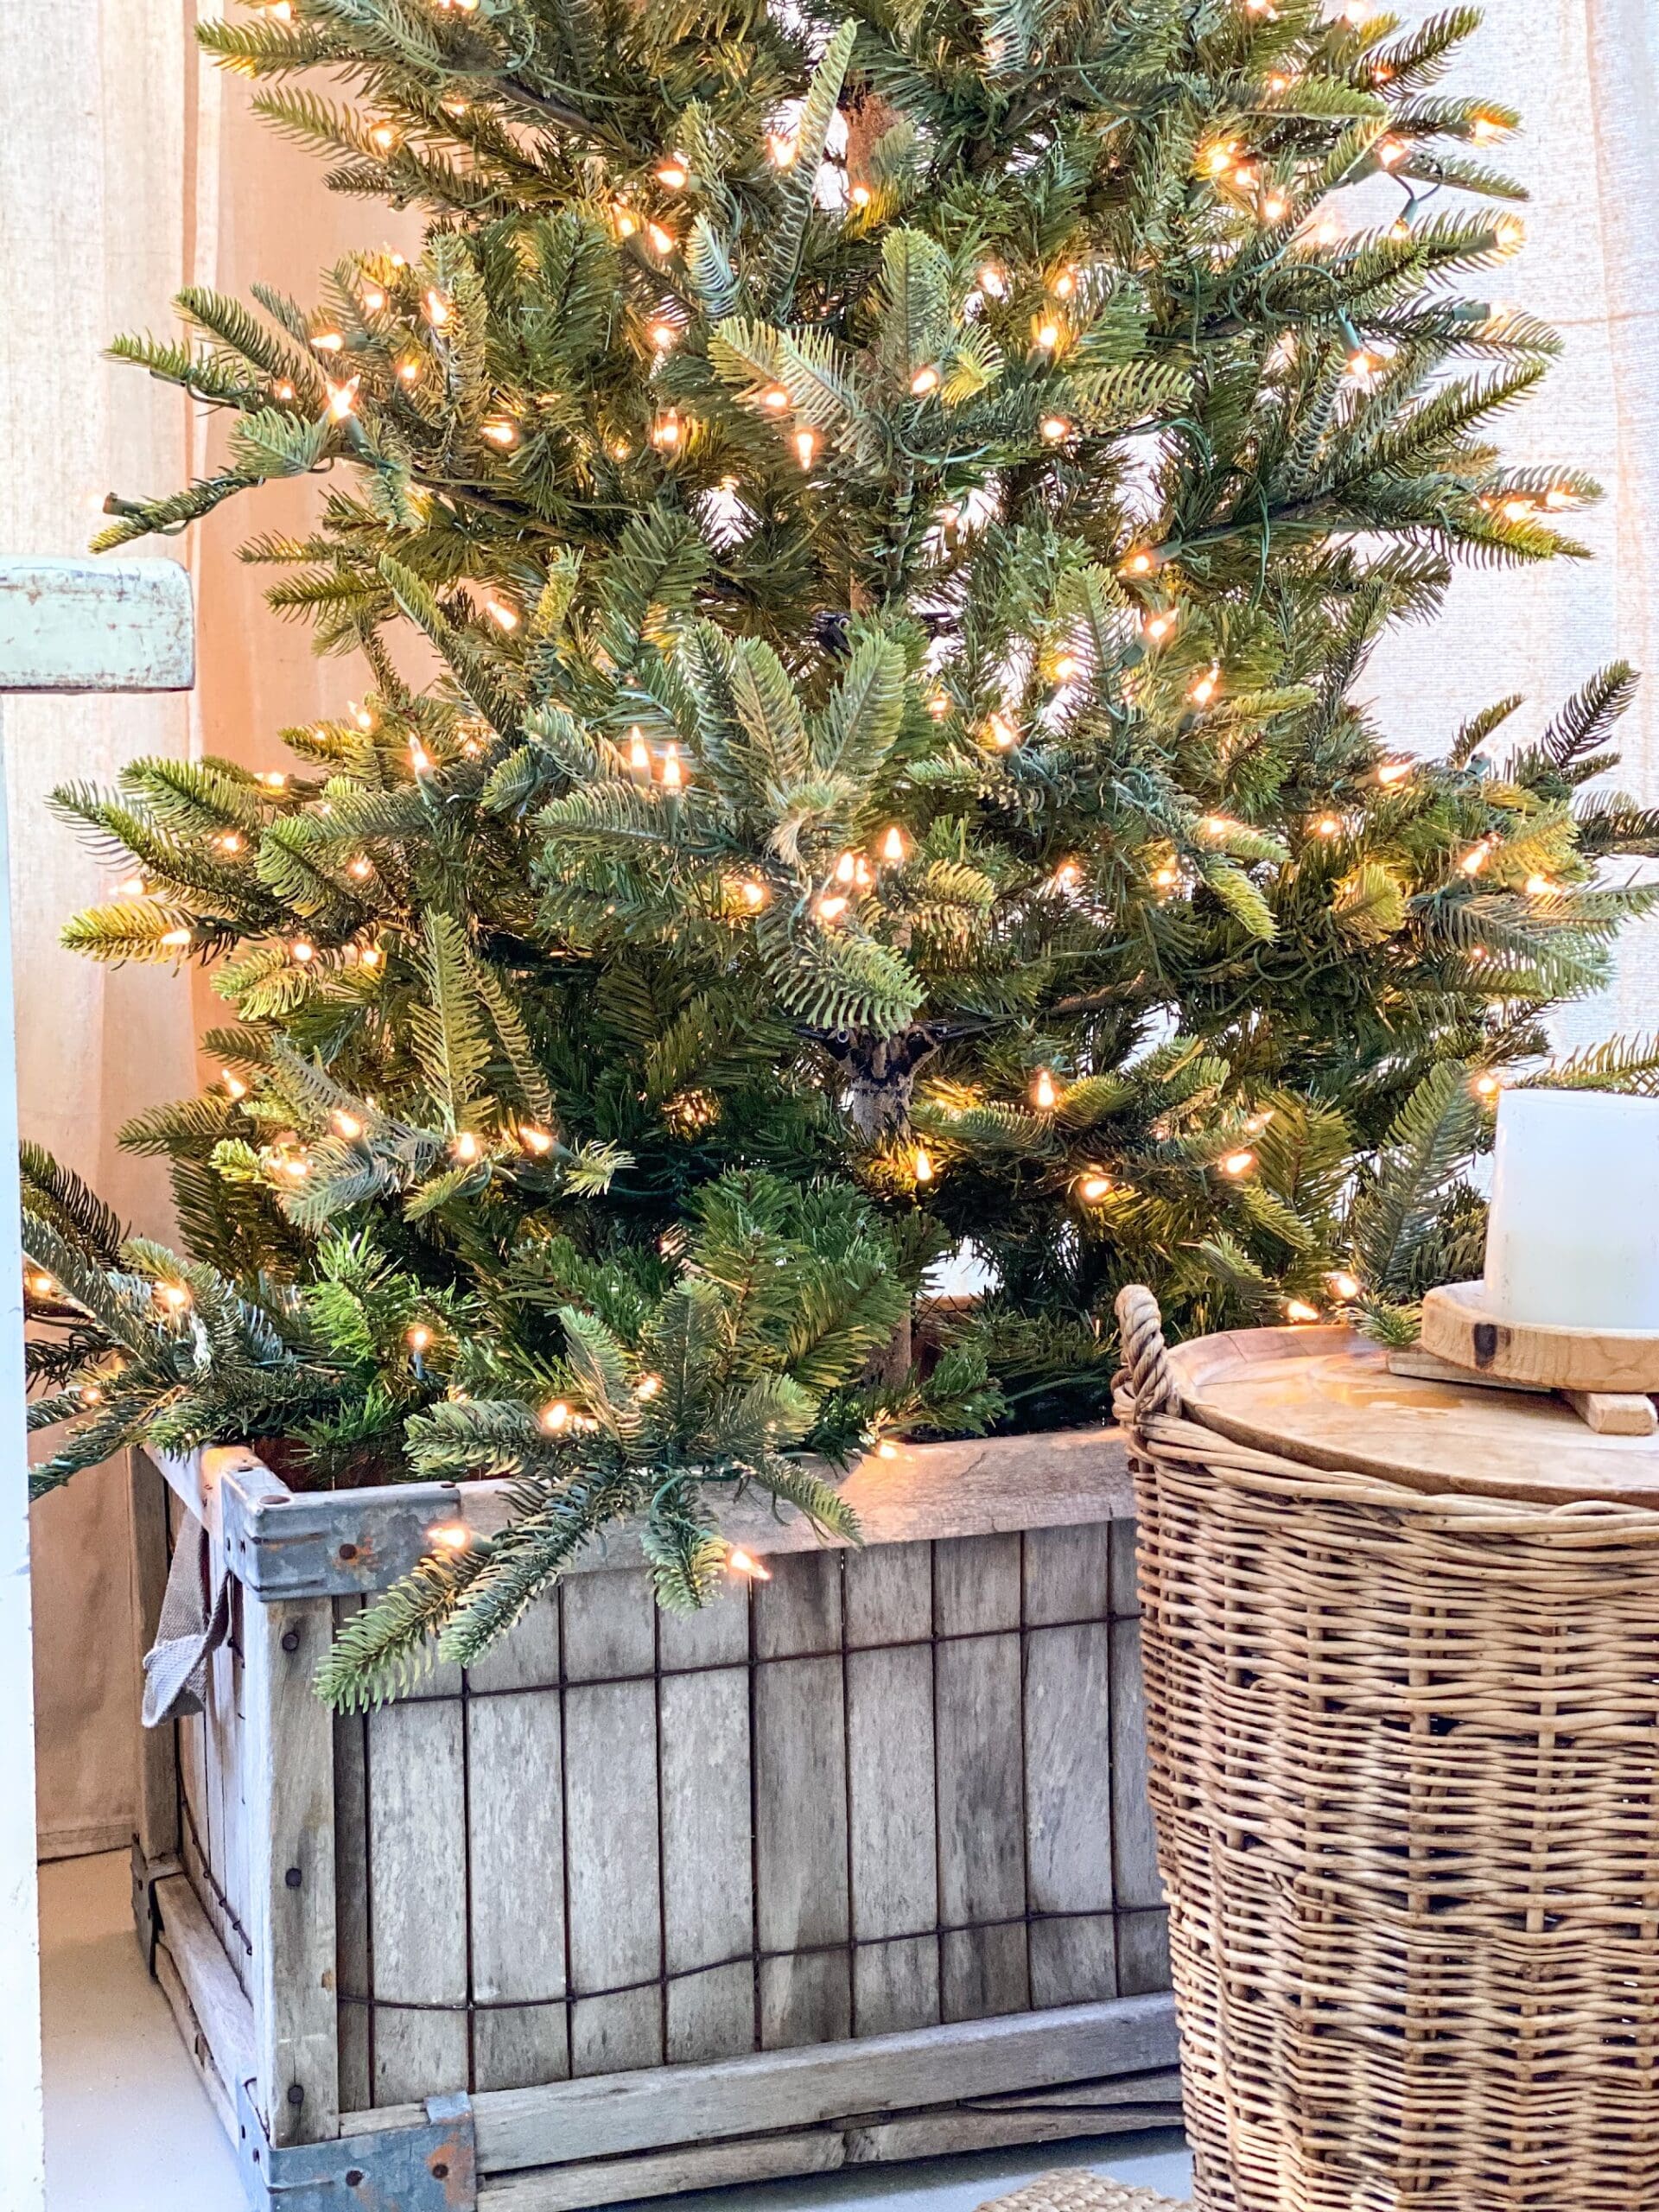 beautiful real-touch Christmas tree in a large wooden crate